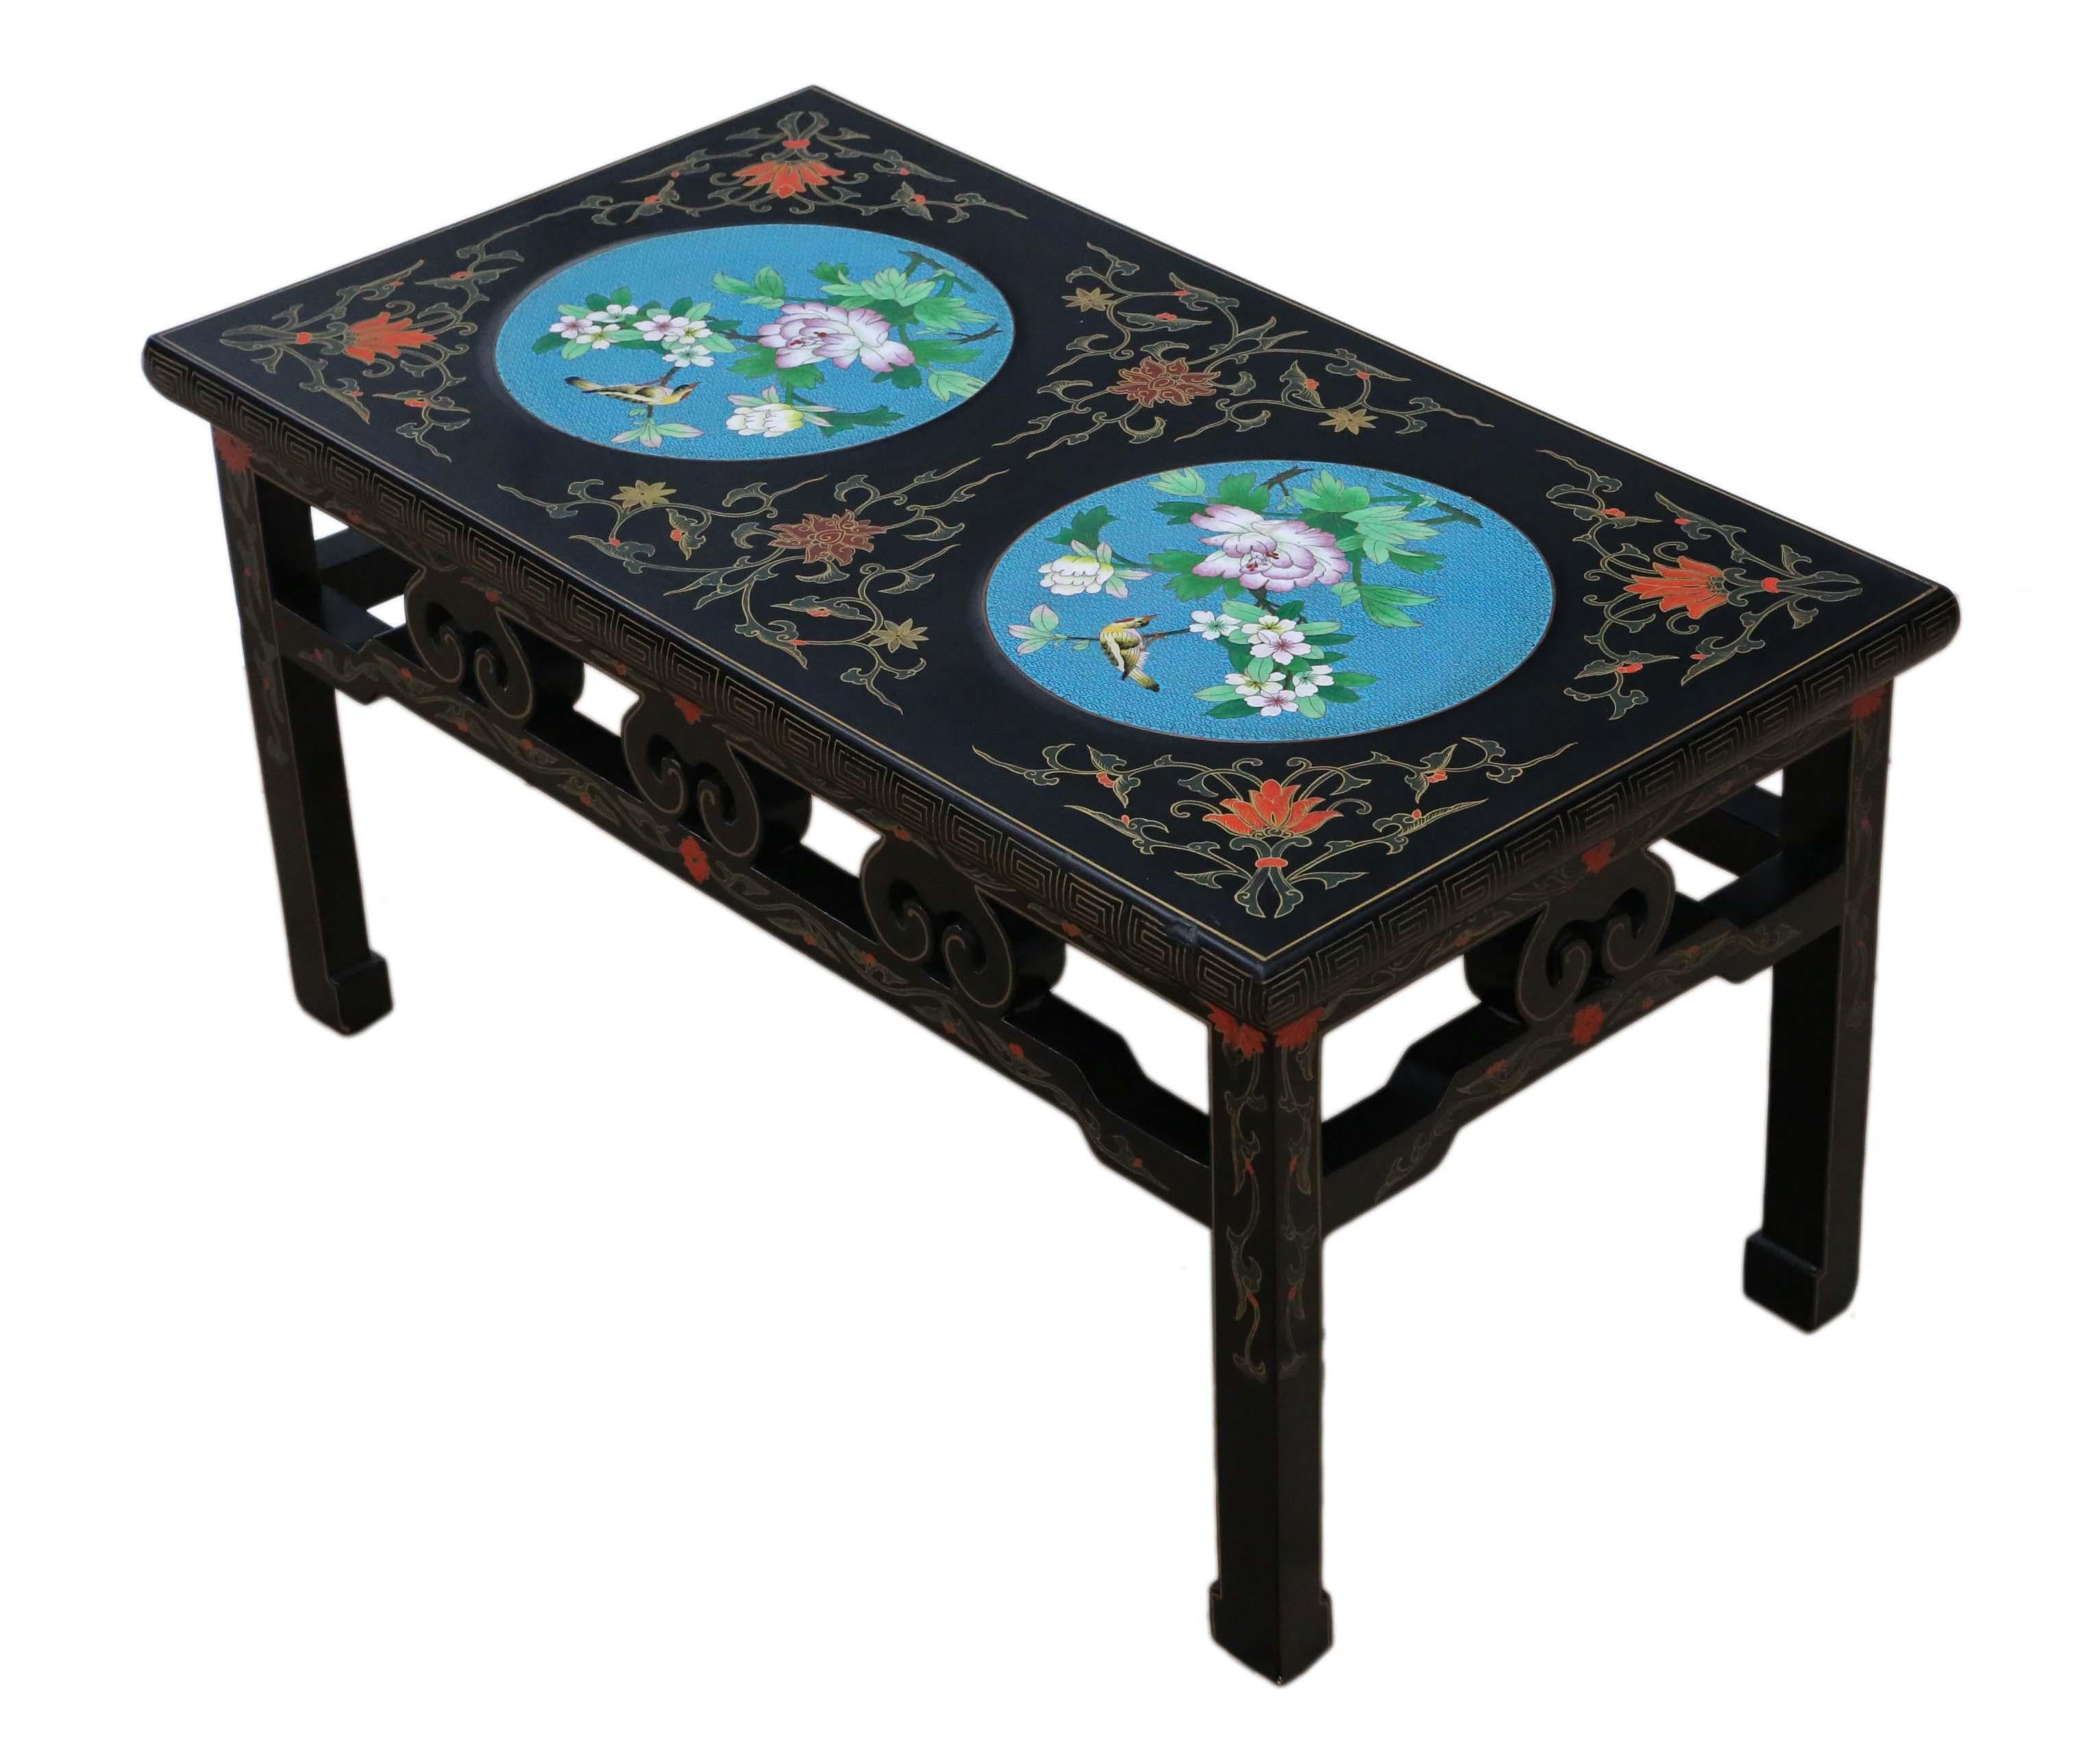 Antique / retro fine quality Chinese or Chinoiserie decorated black lacquer coffee table with fantastic Cloisonne panels, mid-20th Century. Absolutely charming and would have been very expensive when new.

No loose joints and no woodworm.

Would